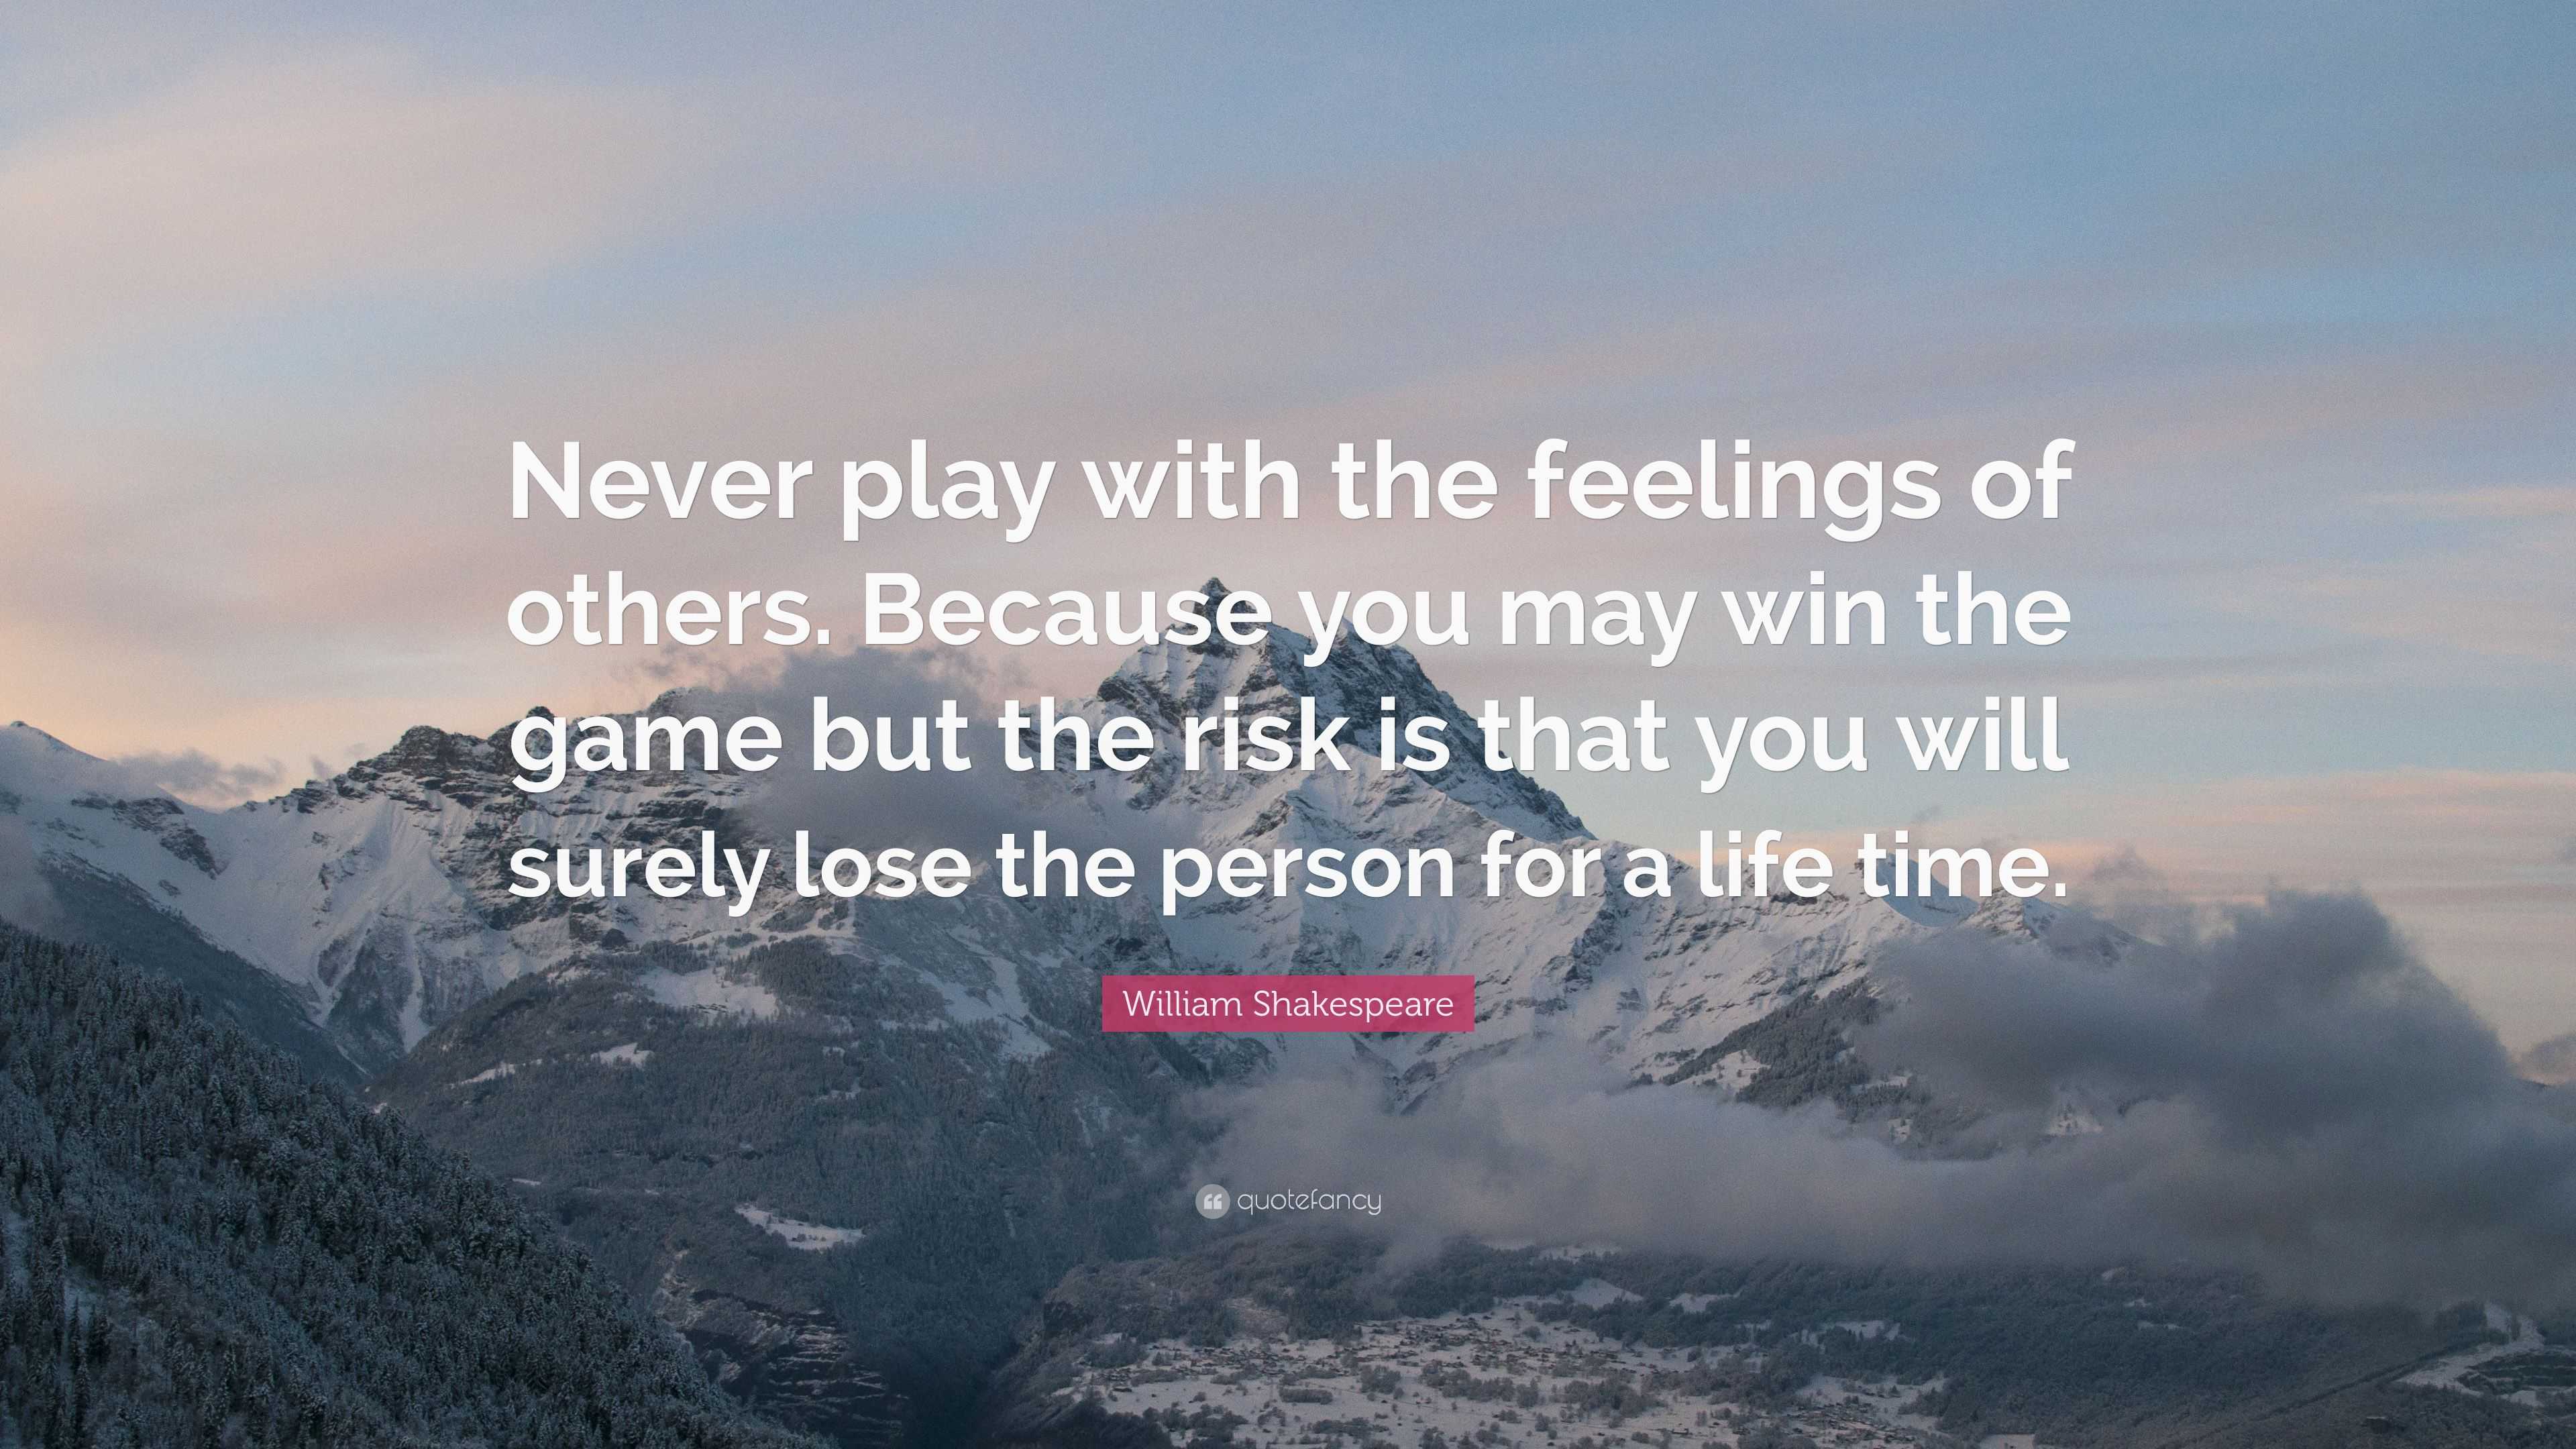 William Shakespeare Quote: “Never play with the feelings of others ...